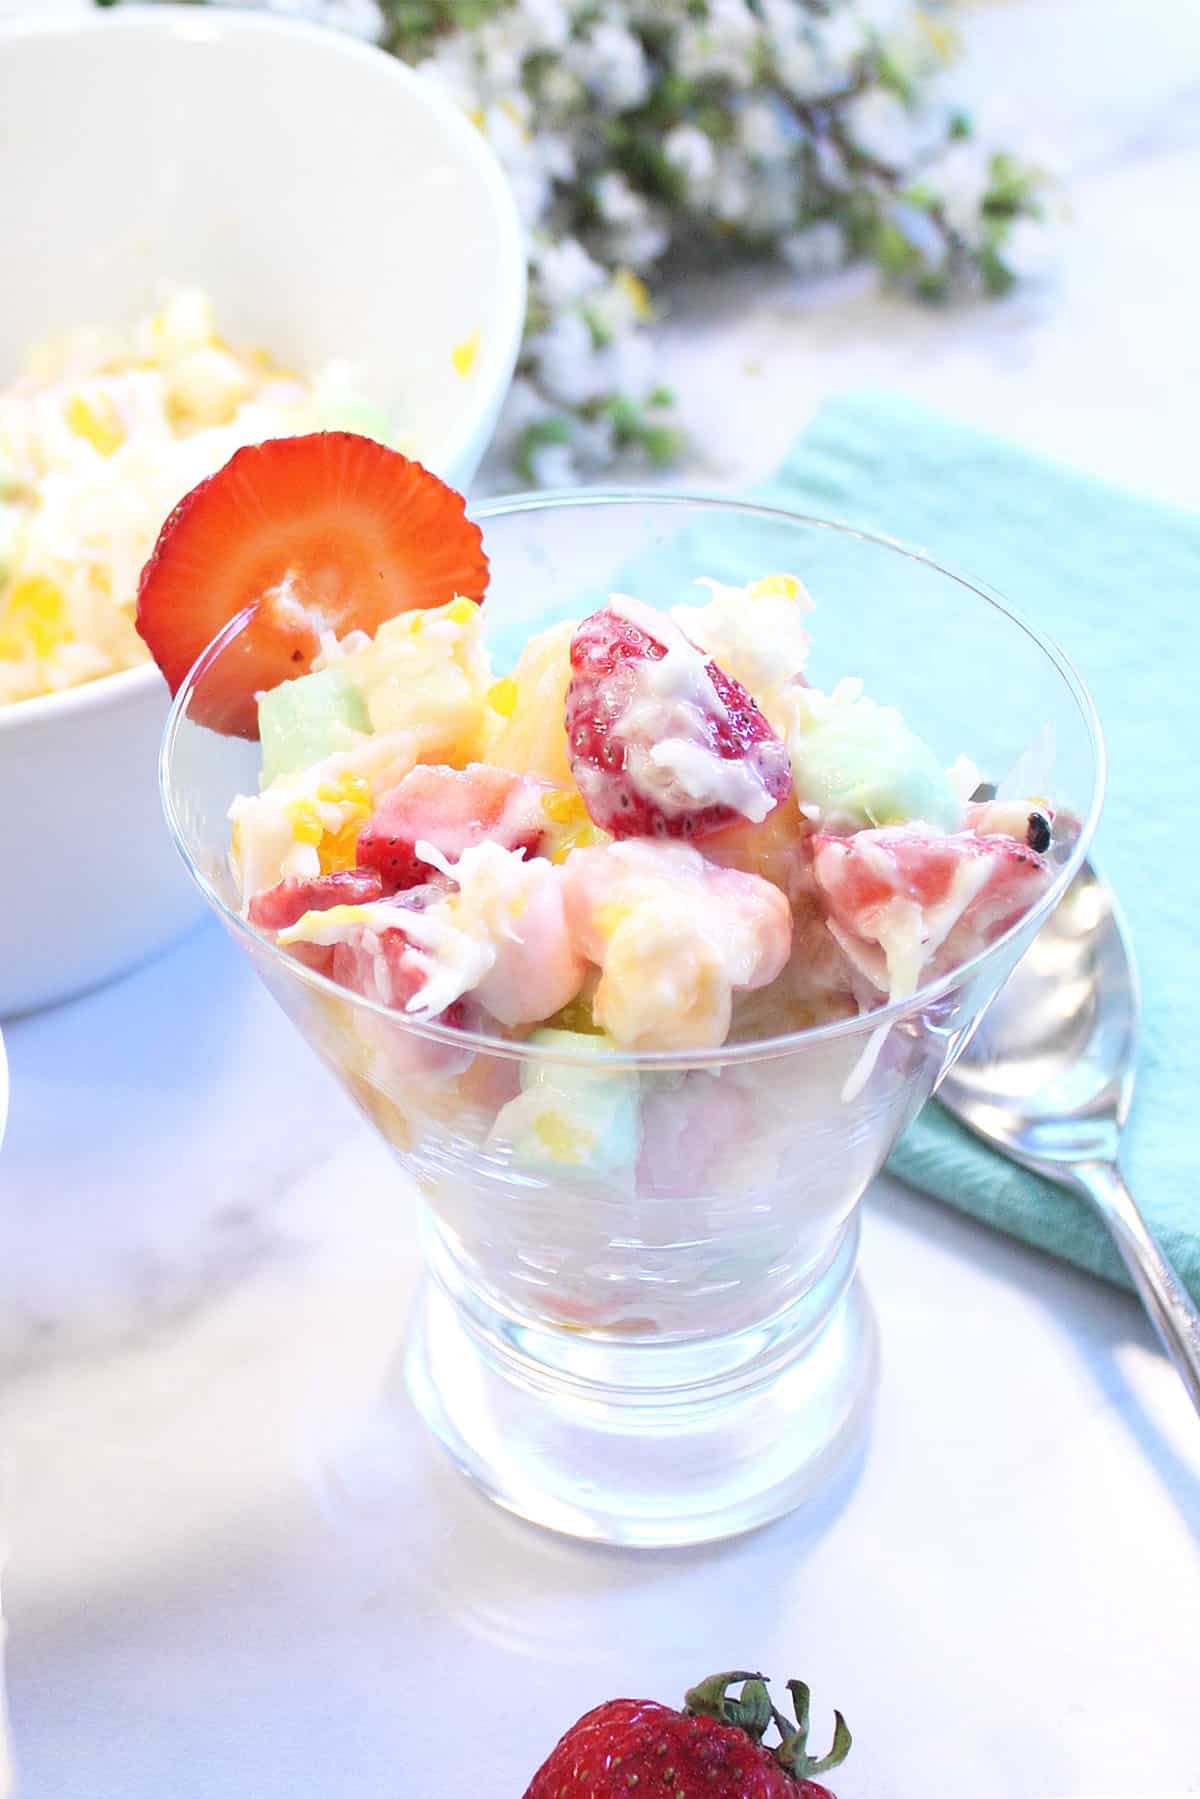 Single serving of Ambrosia Salad in glass dish on white table in front of serving bowl.